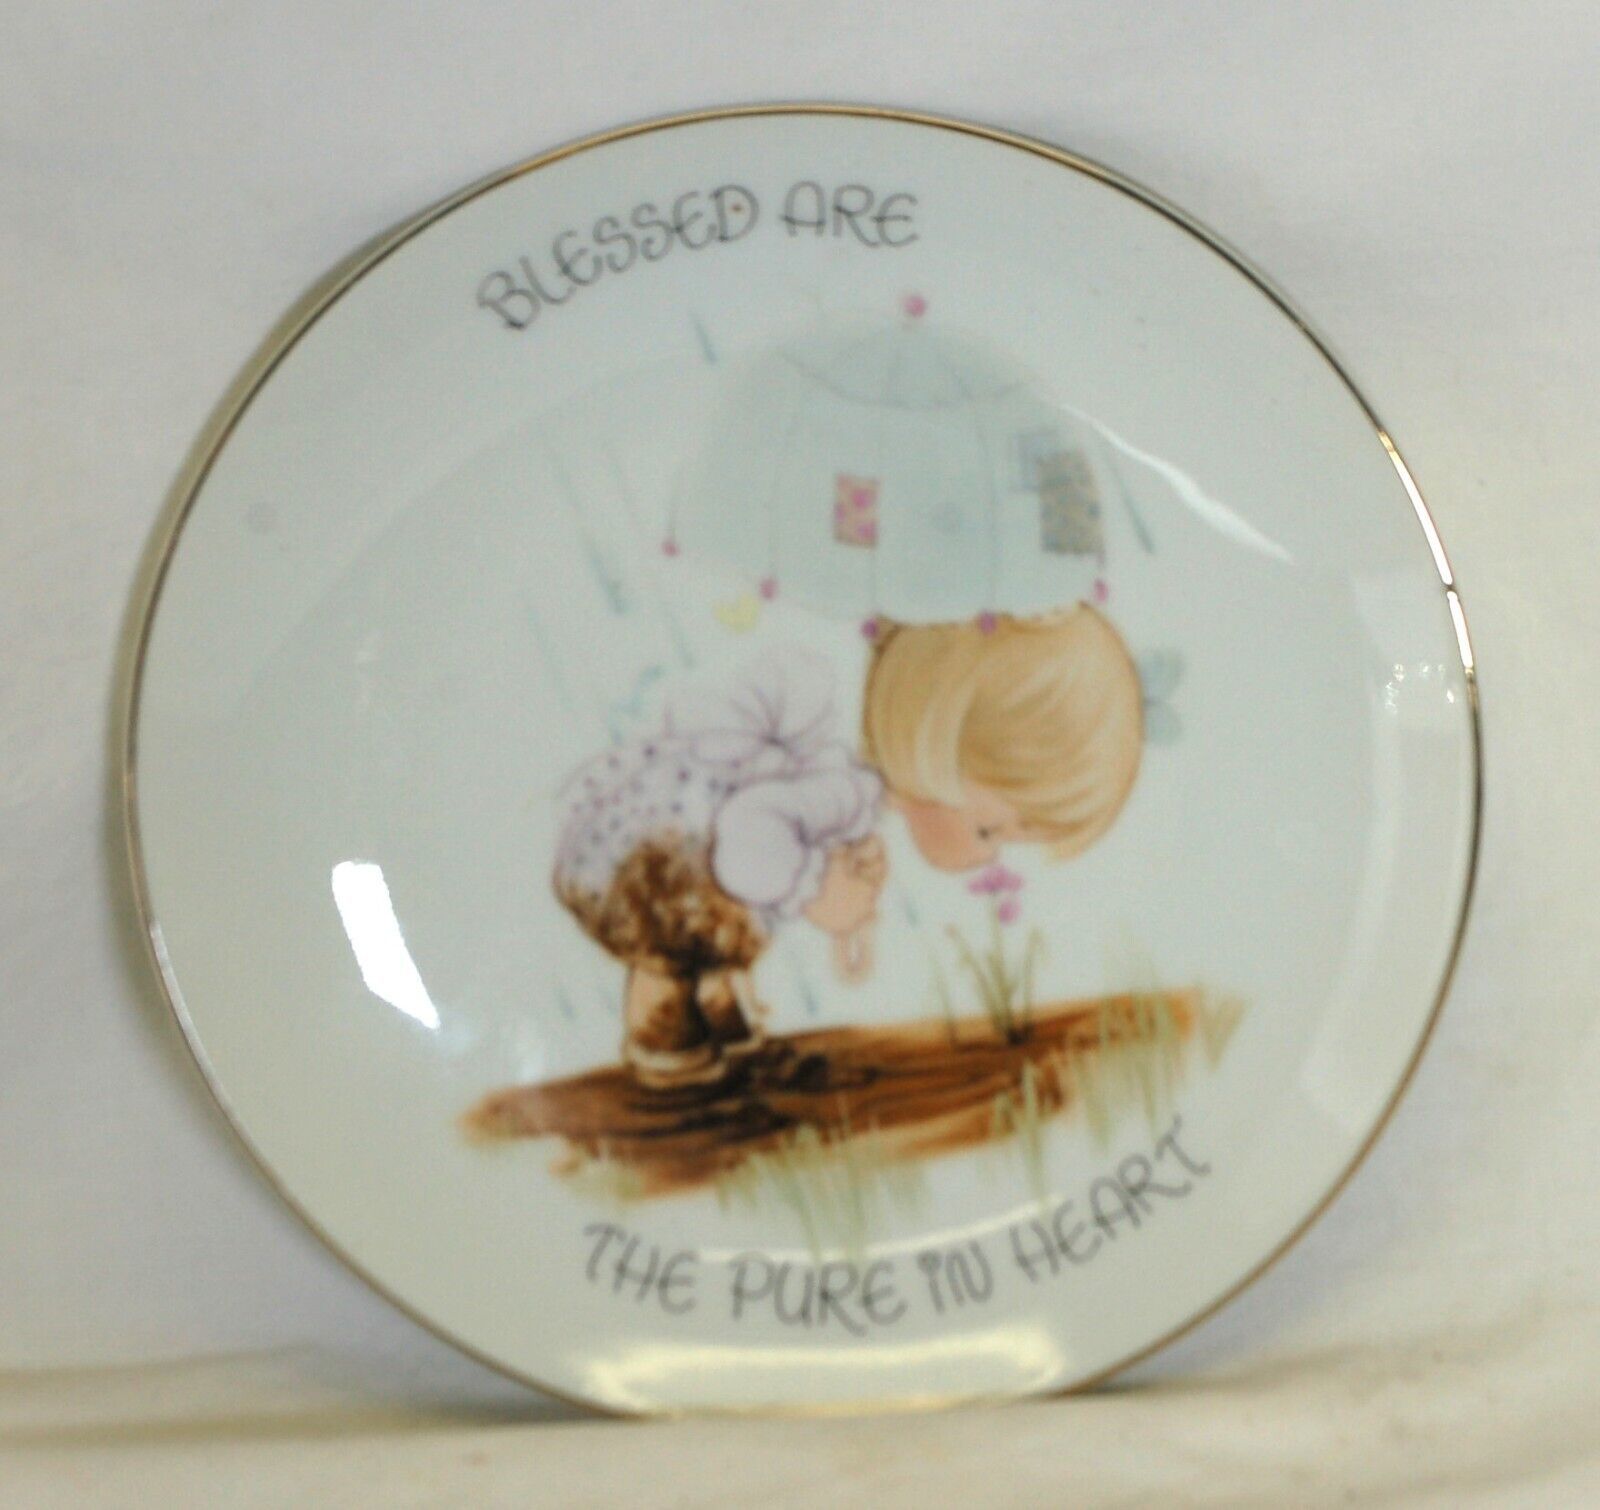 Precious Moments Enesco Collectors Plate Blessed Are Pure in Heart 1984 Japan - £10.07 GBP